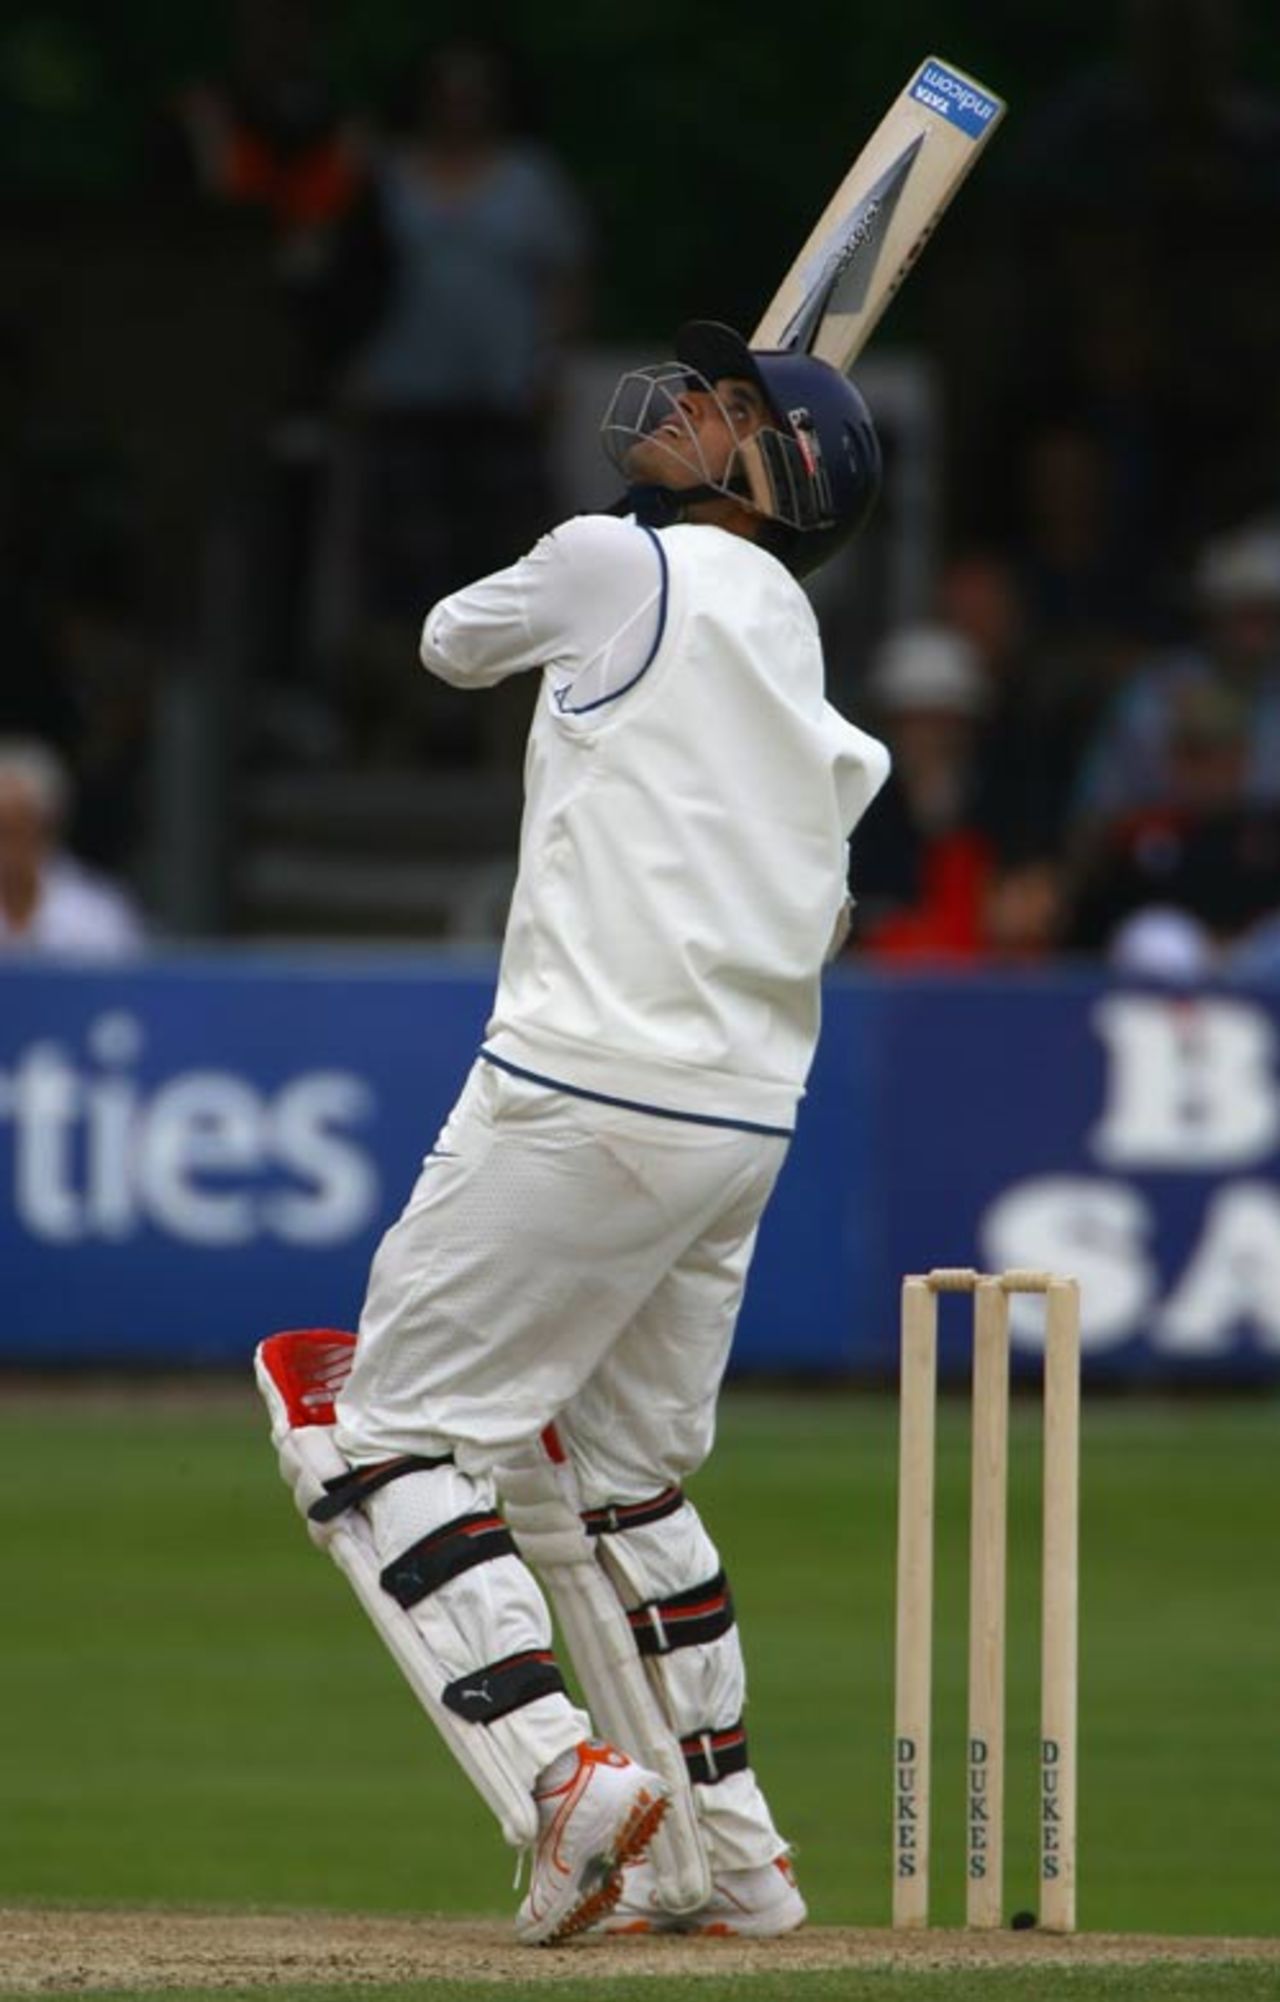 Sourav Ganguly looks up after miscuing a pull which led to his dismissal, England Lions v Indians, Tour match, 2nd day,  Chelmsford, July 14, 2007
